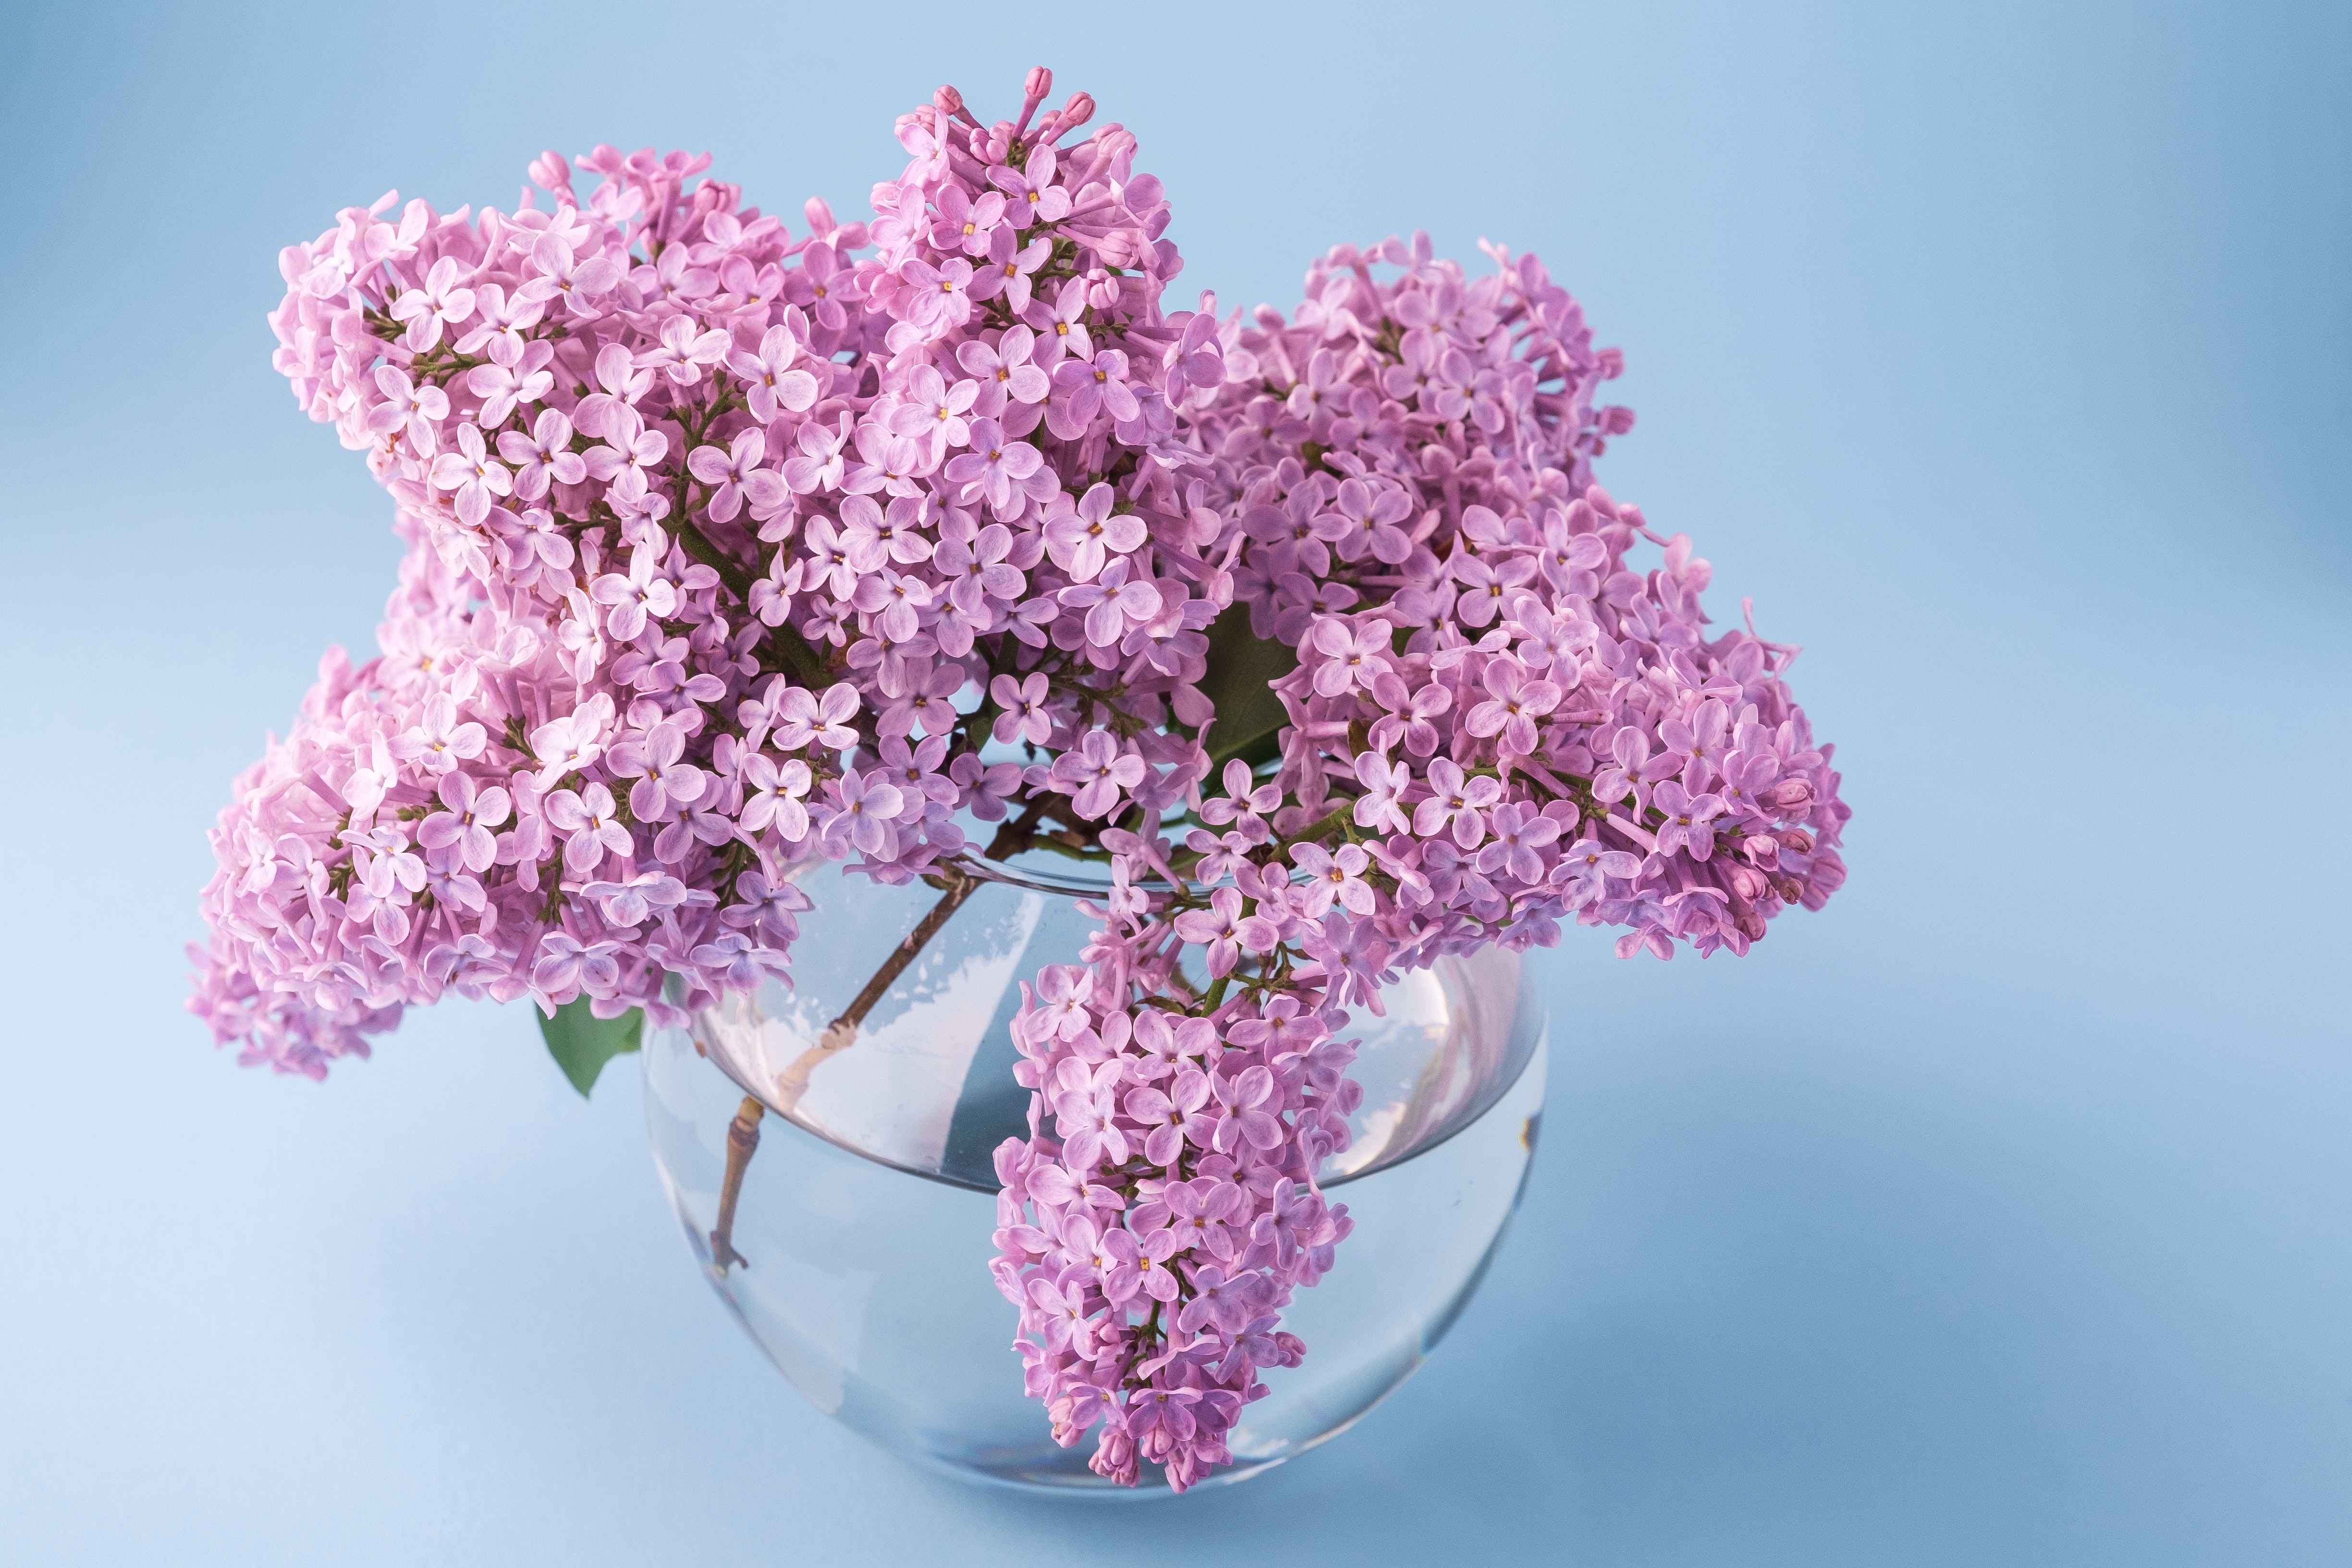 Lilacs are perfect purple flowers for weddings